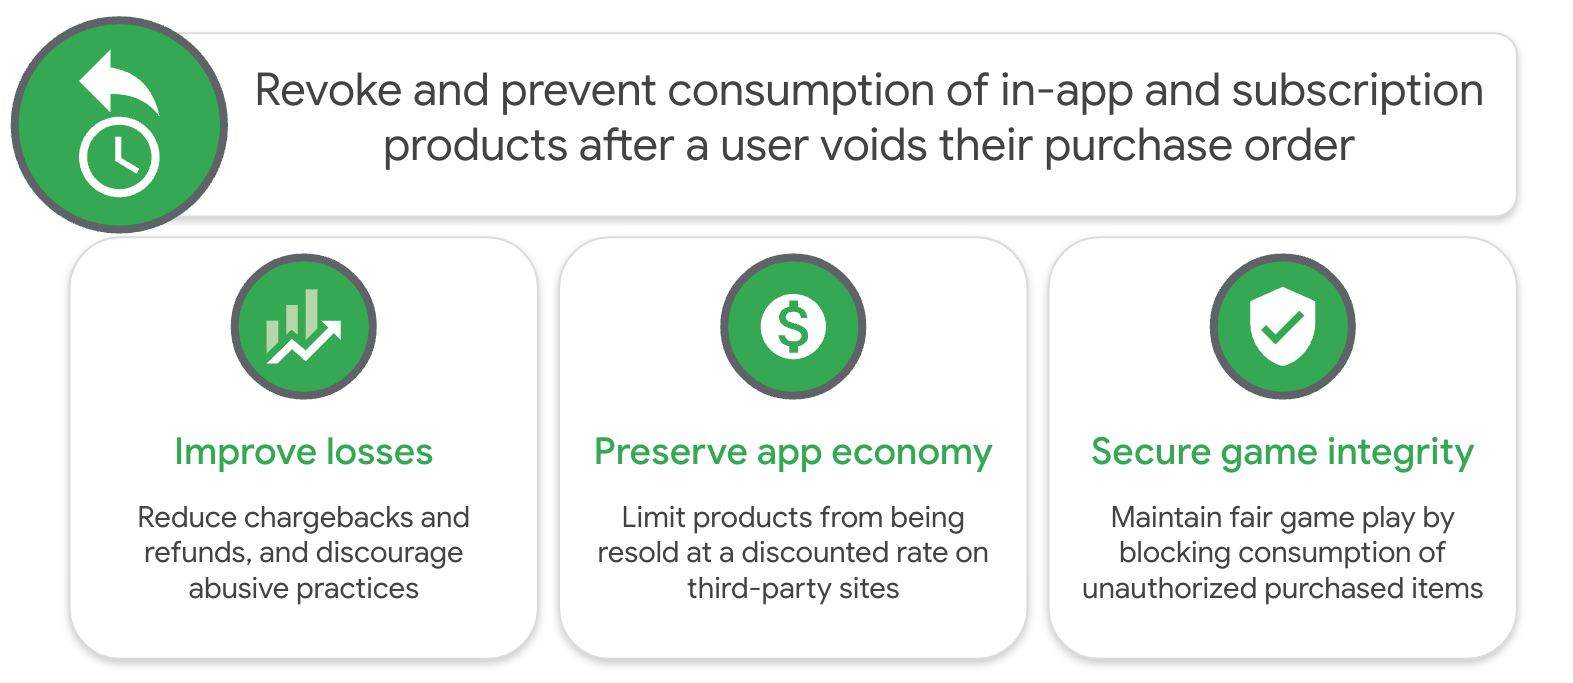 Diagram detailing Improve losses, preserve app economy, and secure game integrity as benfits of Voided Purchases API